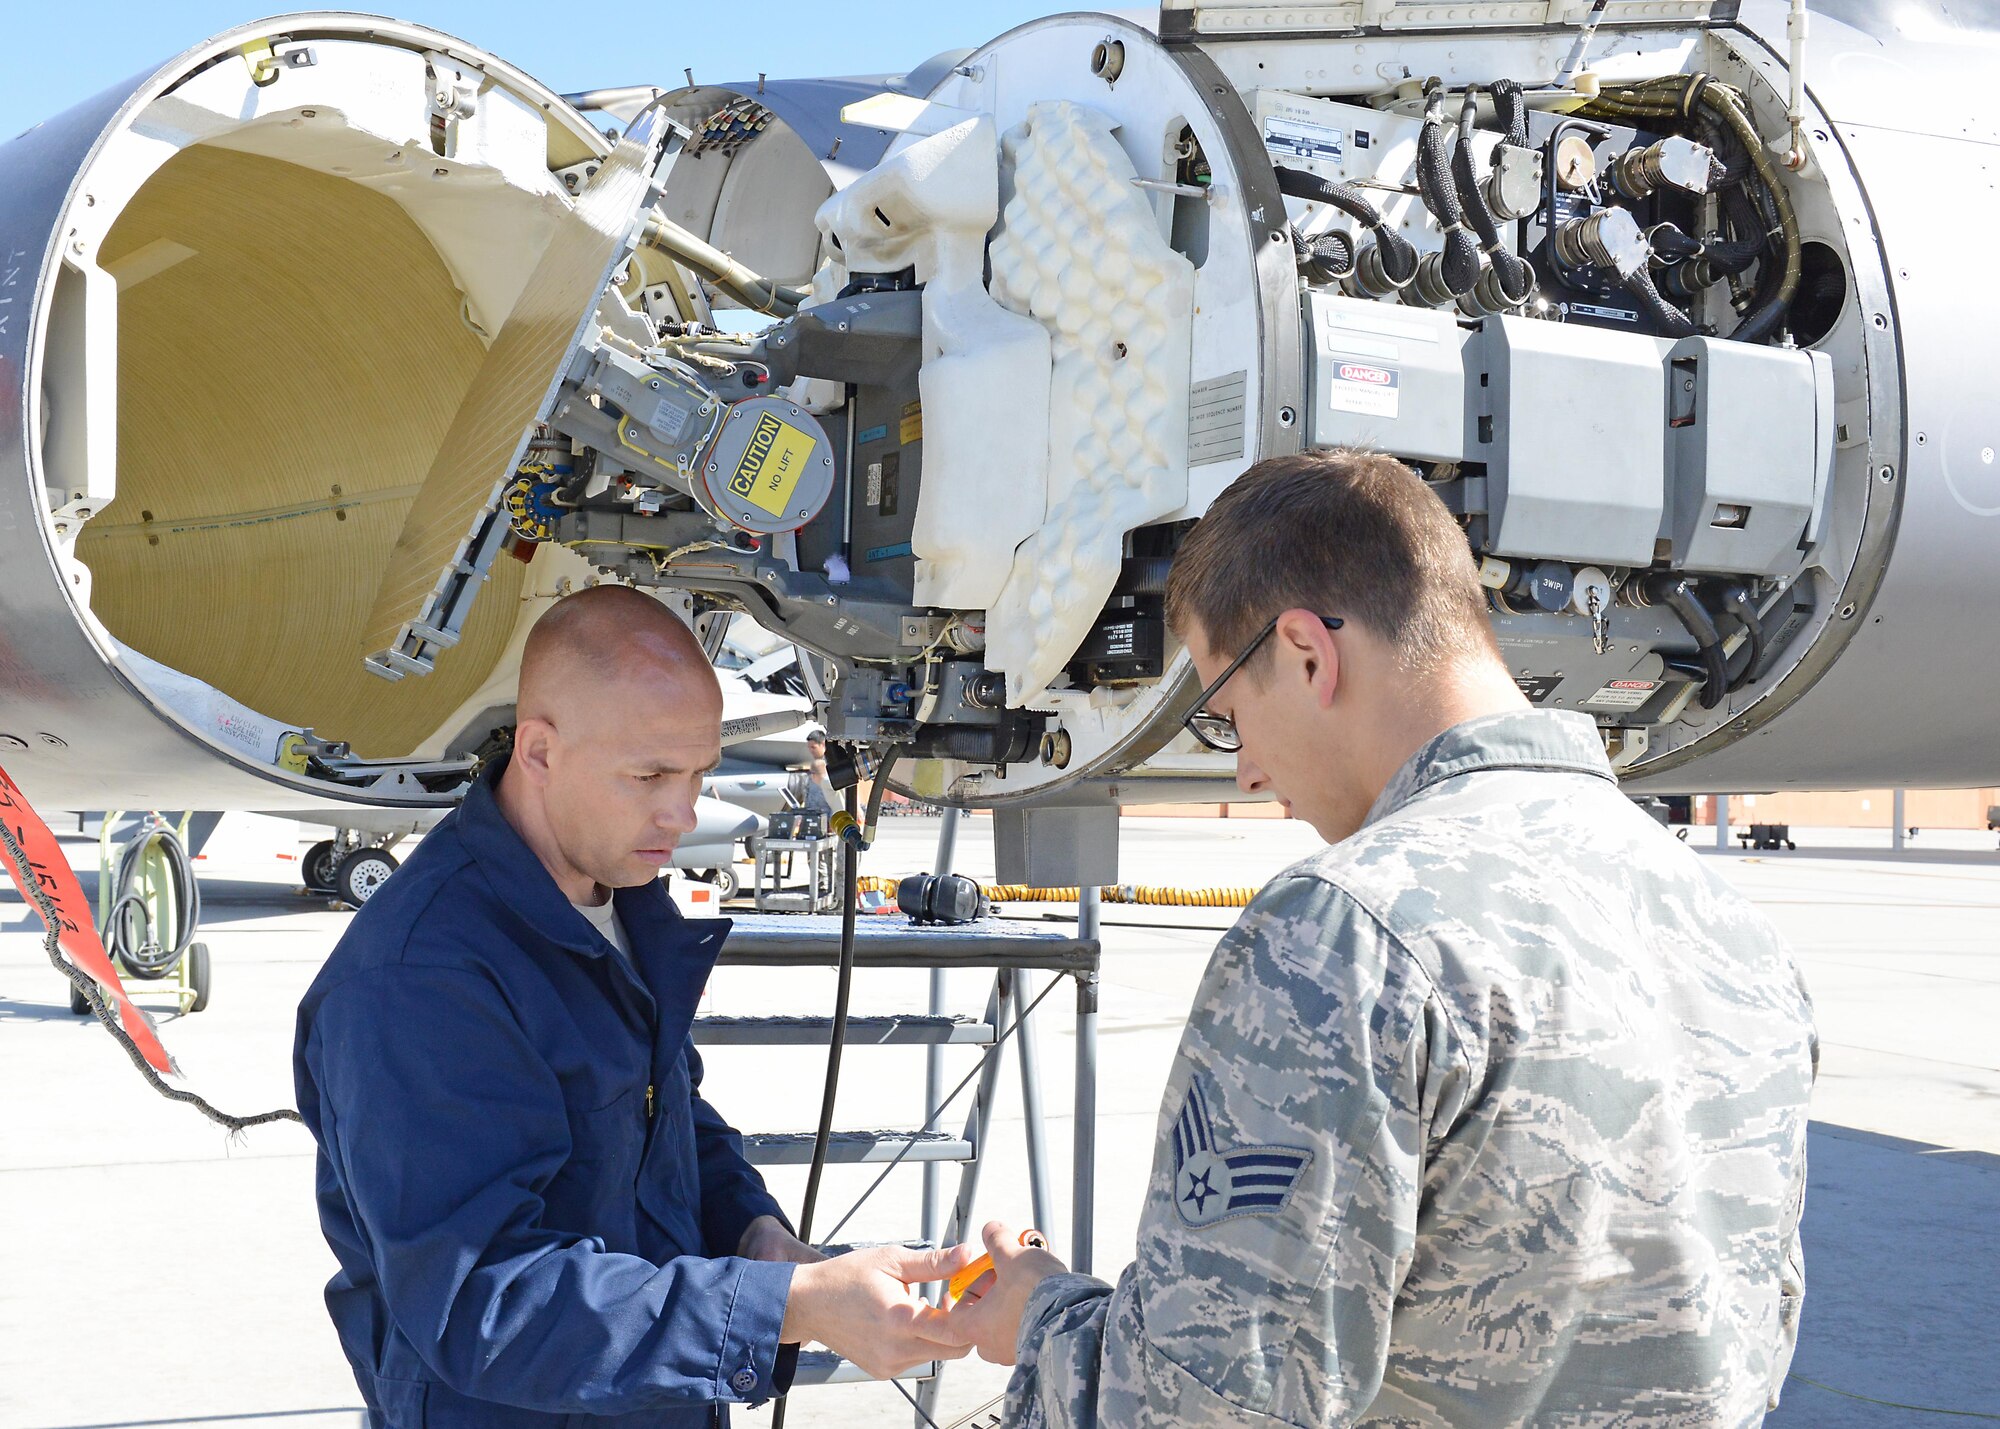 Senior Master Sgt. Samuel Rock, an Air Force Reserve volunteer from Seymour Johnson Air Force Base, N.C., works with Senior Airman Quilan Johansen, of the 412th Aircraft Maintenance Squadron, on an F-16 Fighting Falcon radar waveguide pressurization. Reservists are augmenting F-16 support for KC-46 Pegasus testing at Edwards Air Force Base, Calif. (U.S. Air force photo/Kenji Thuloweit)